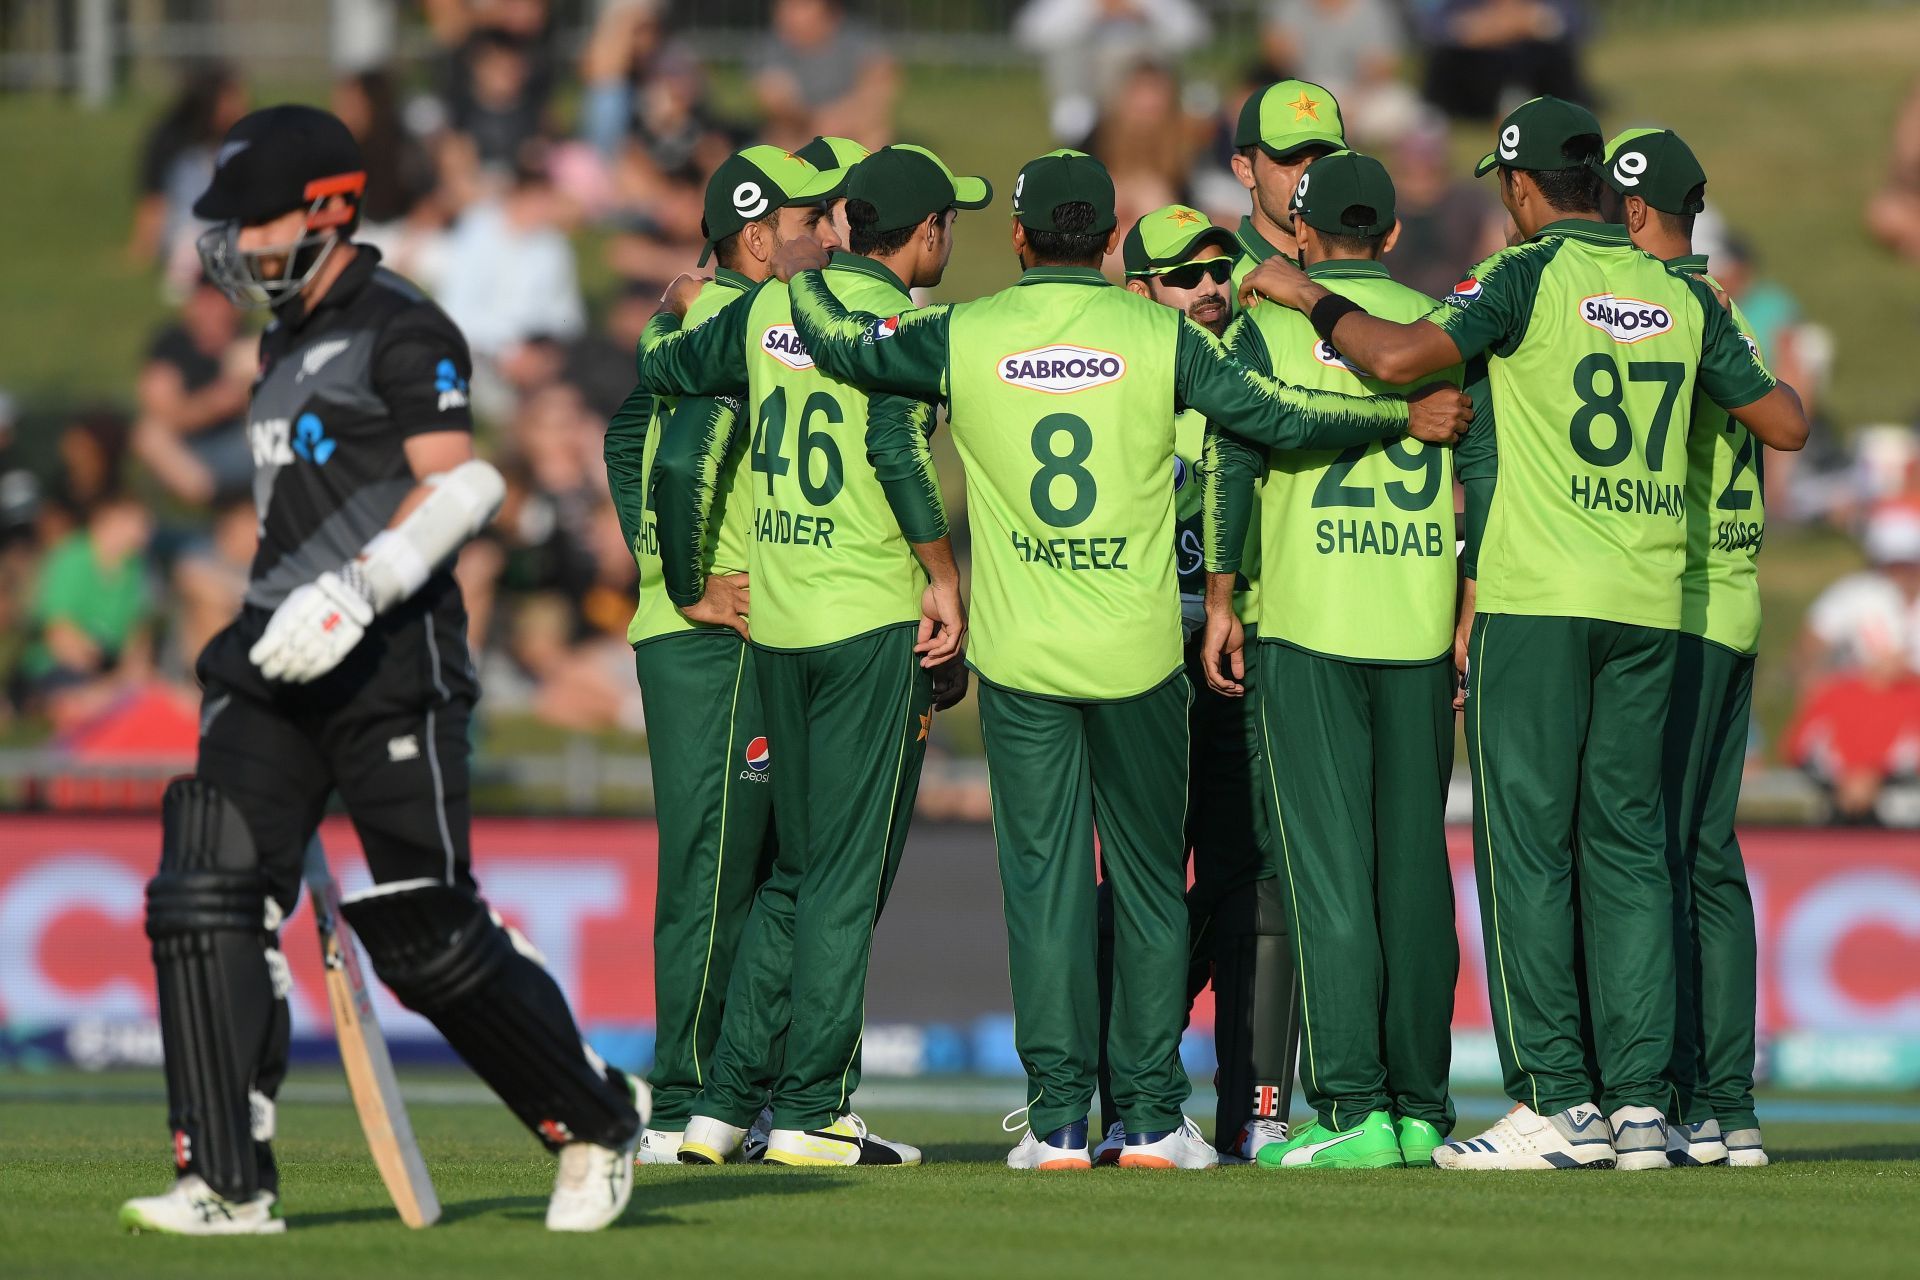 Pakistan will play their second match of the T20 World Cup 2021 against New Zealand